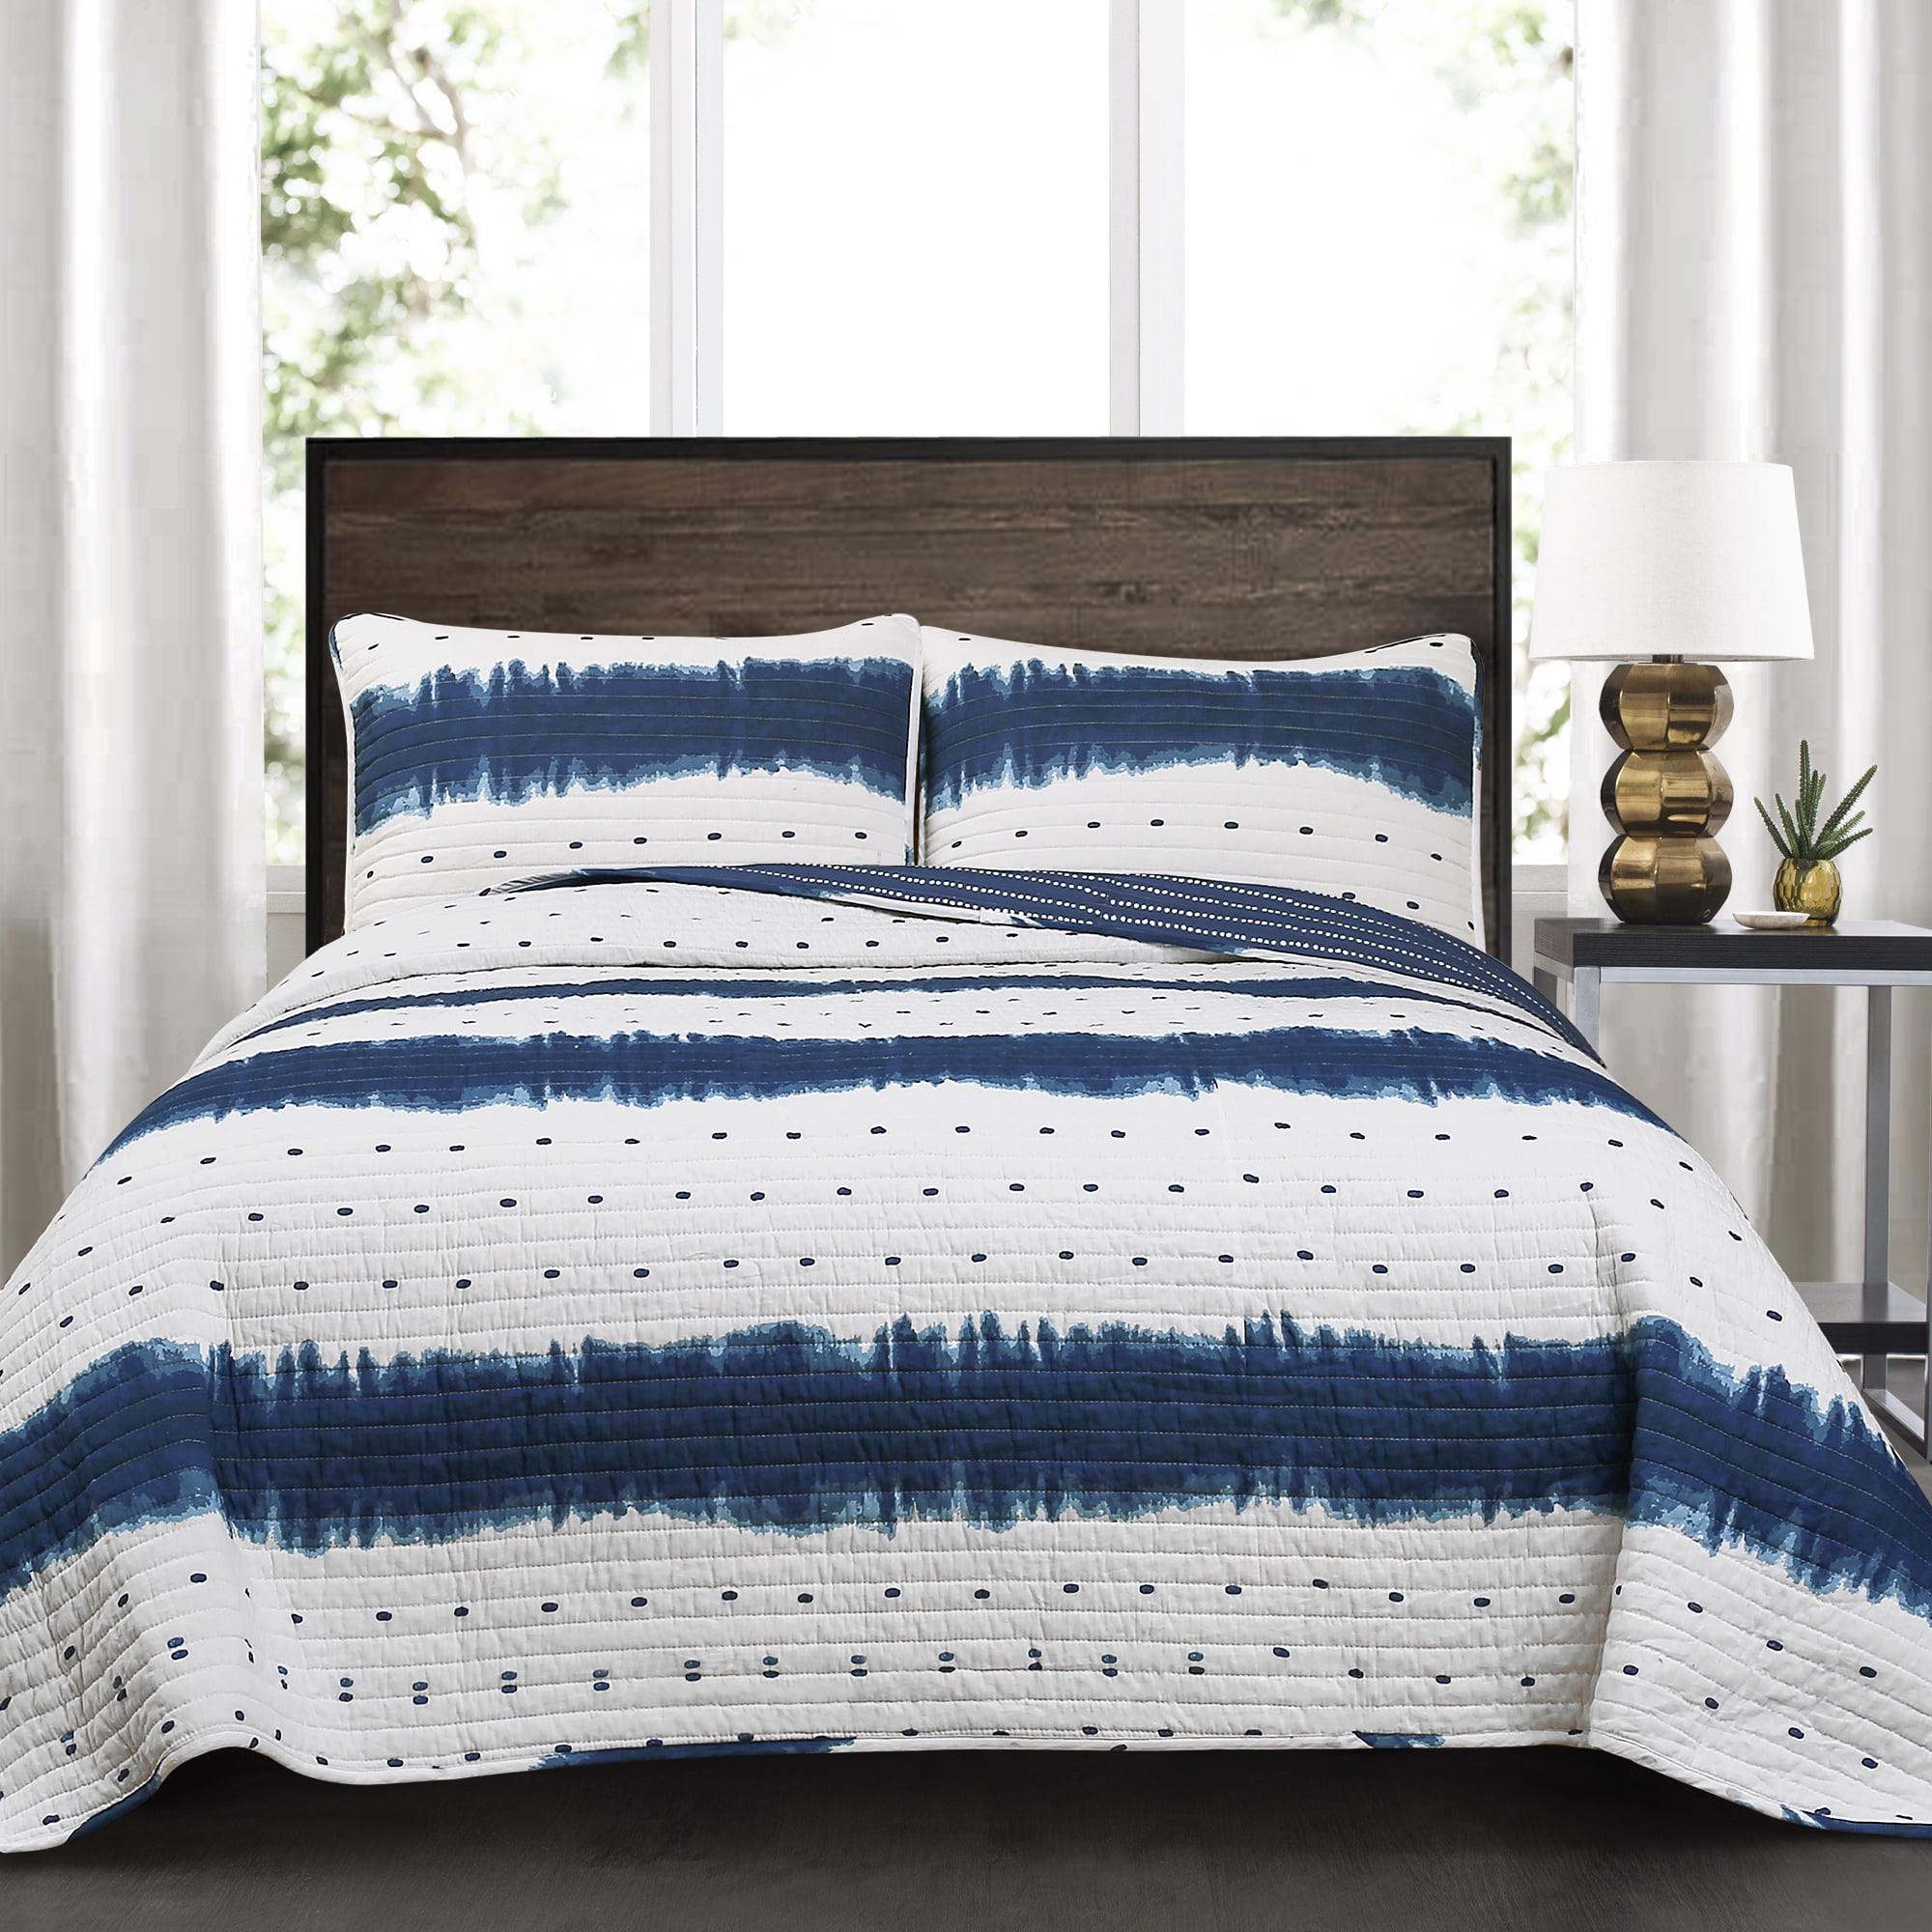 Lush Decor New Berlin Quilt Striped Pattern 3 Piece Bedding Set Full Queen Navy and White Triangle Home Fashions 16T000491